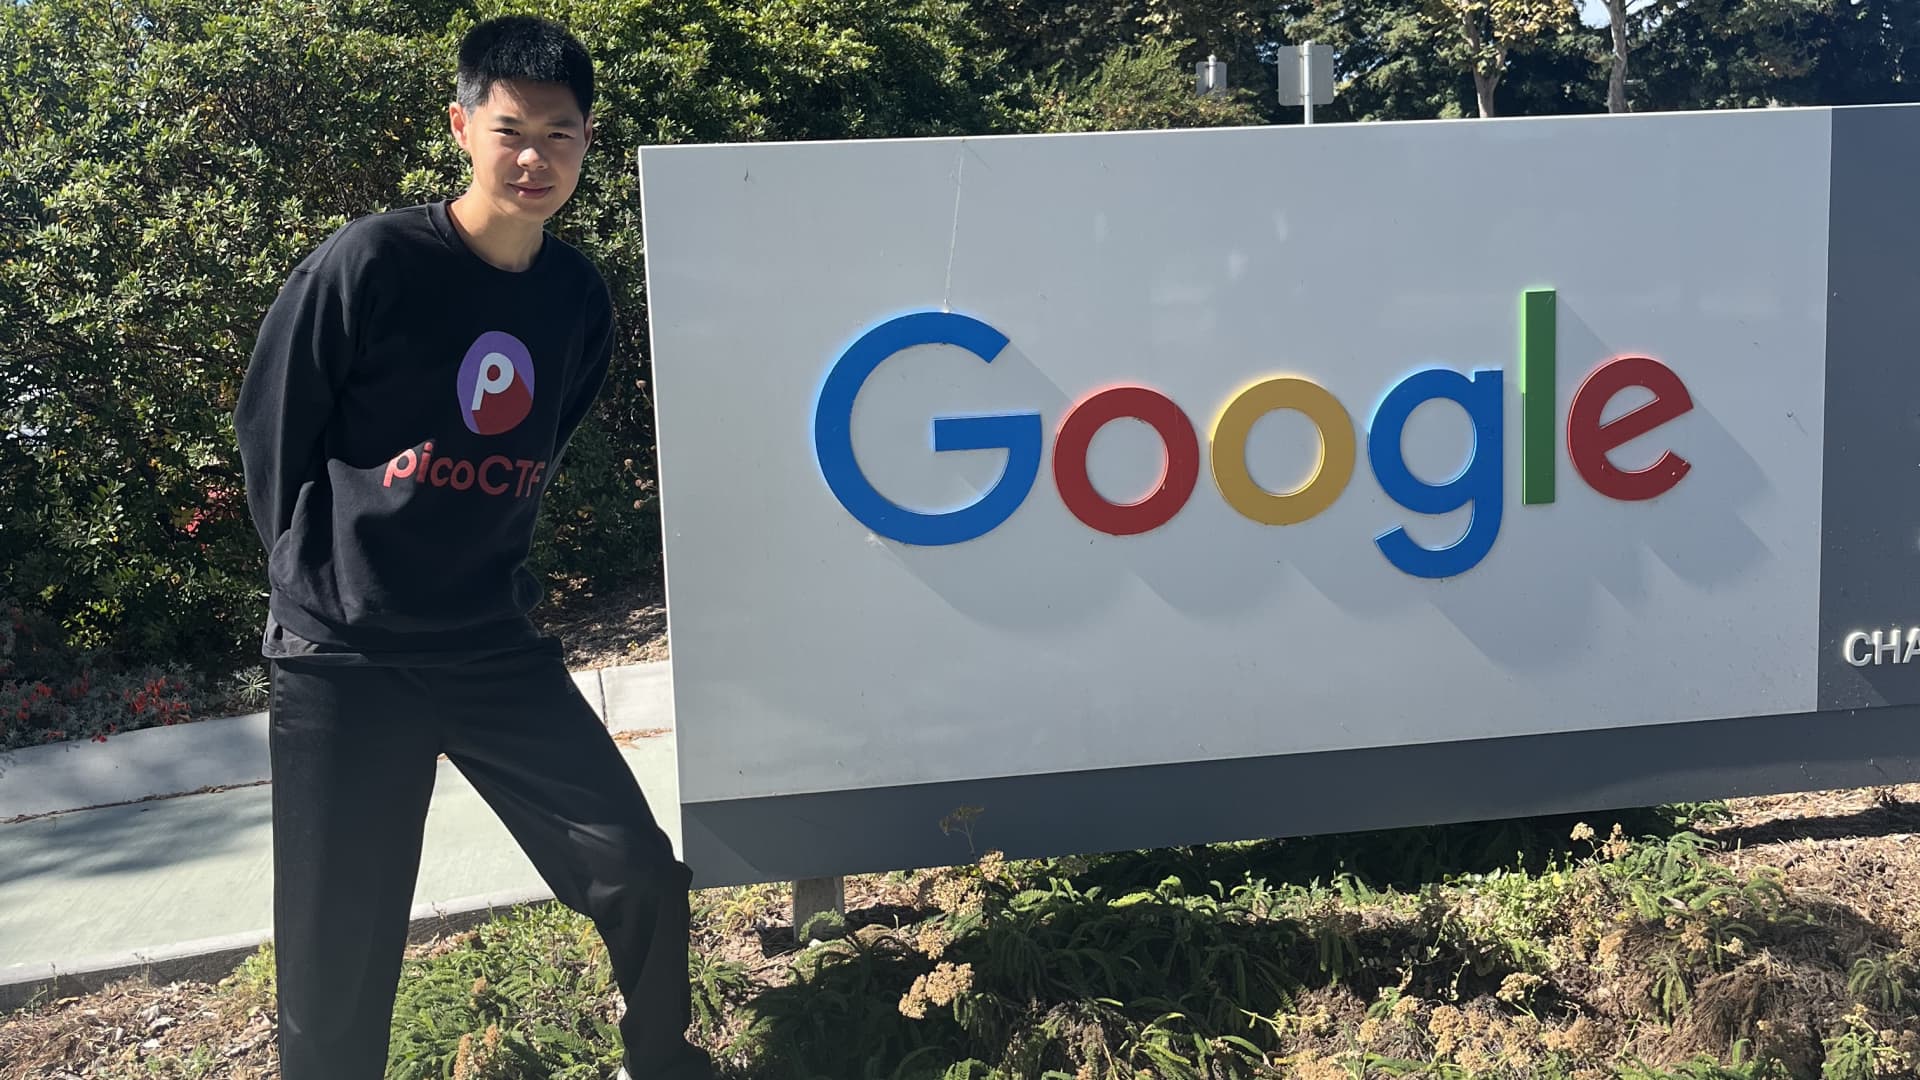 18-year-old-got-hired-as-a-google-engineer-his-dad-shares-his-no-1-parenting-rule-i-take-a-hands-off-approach